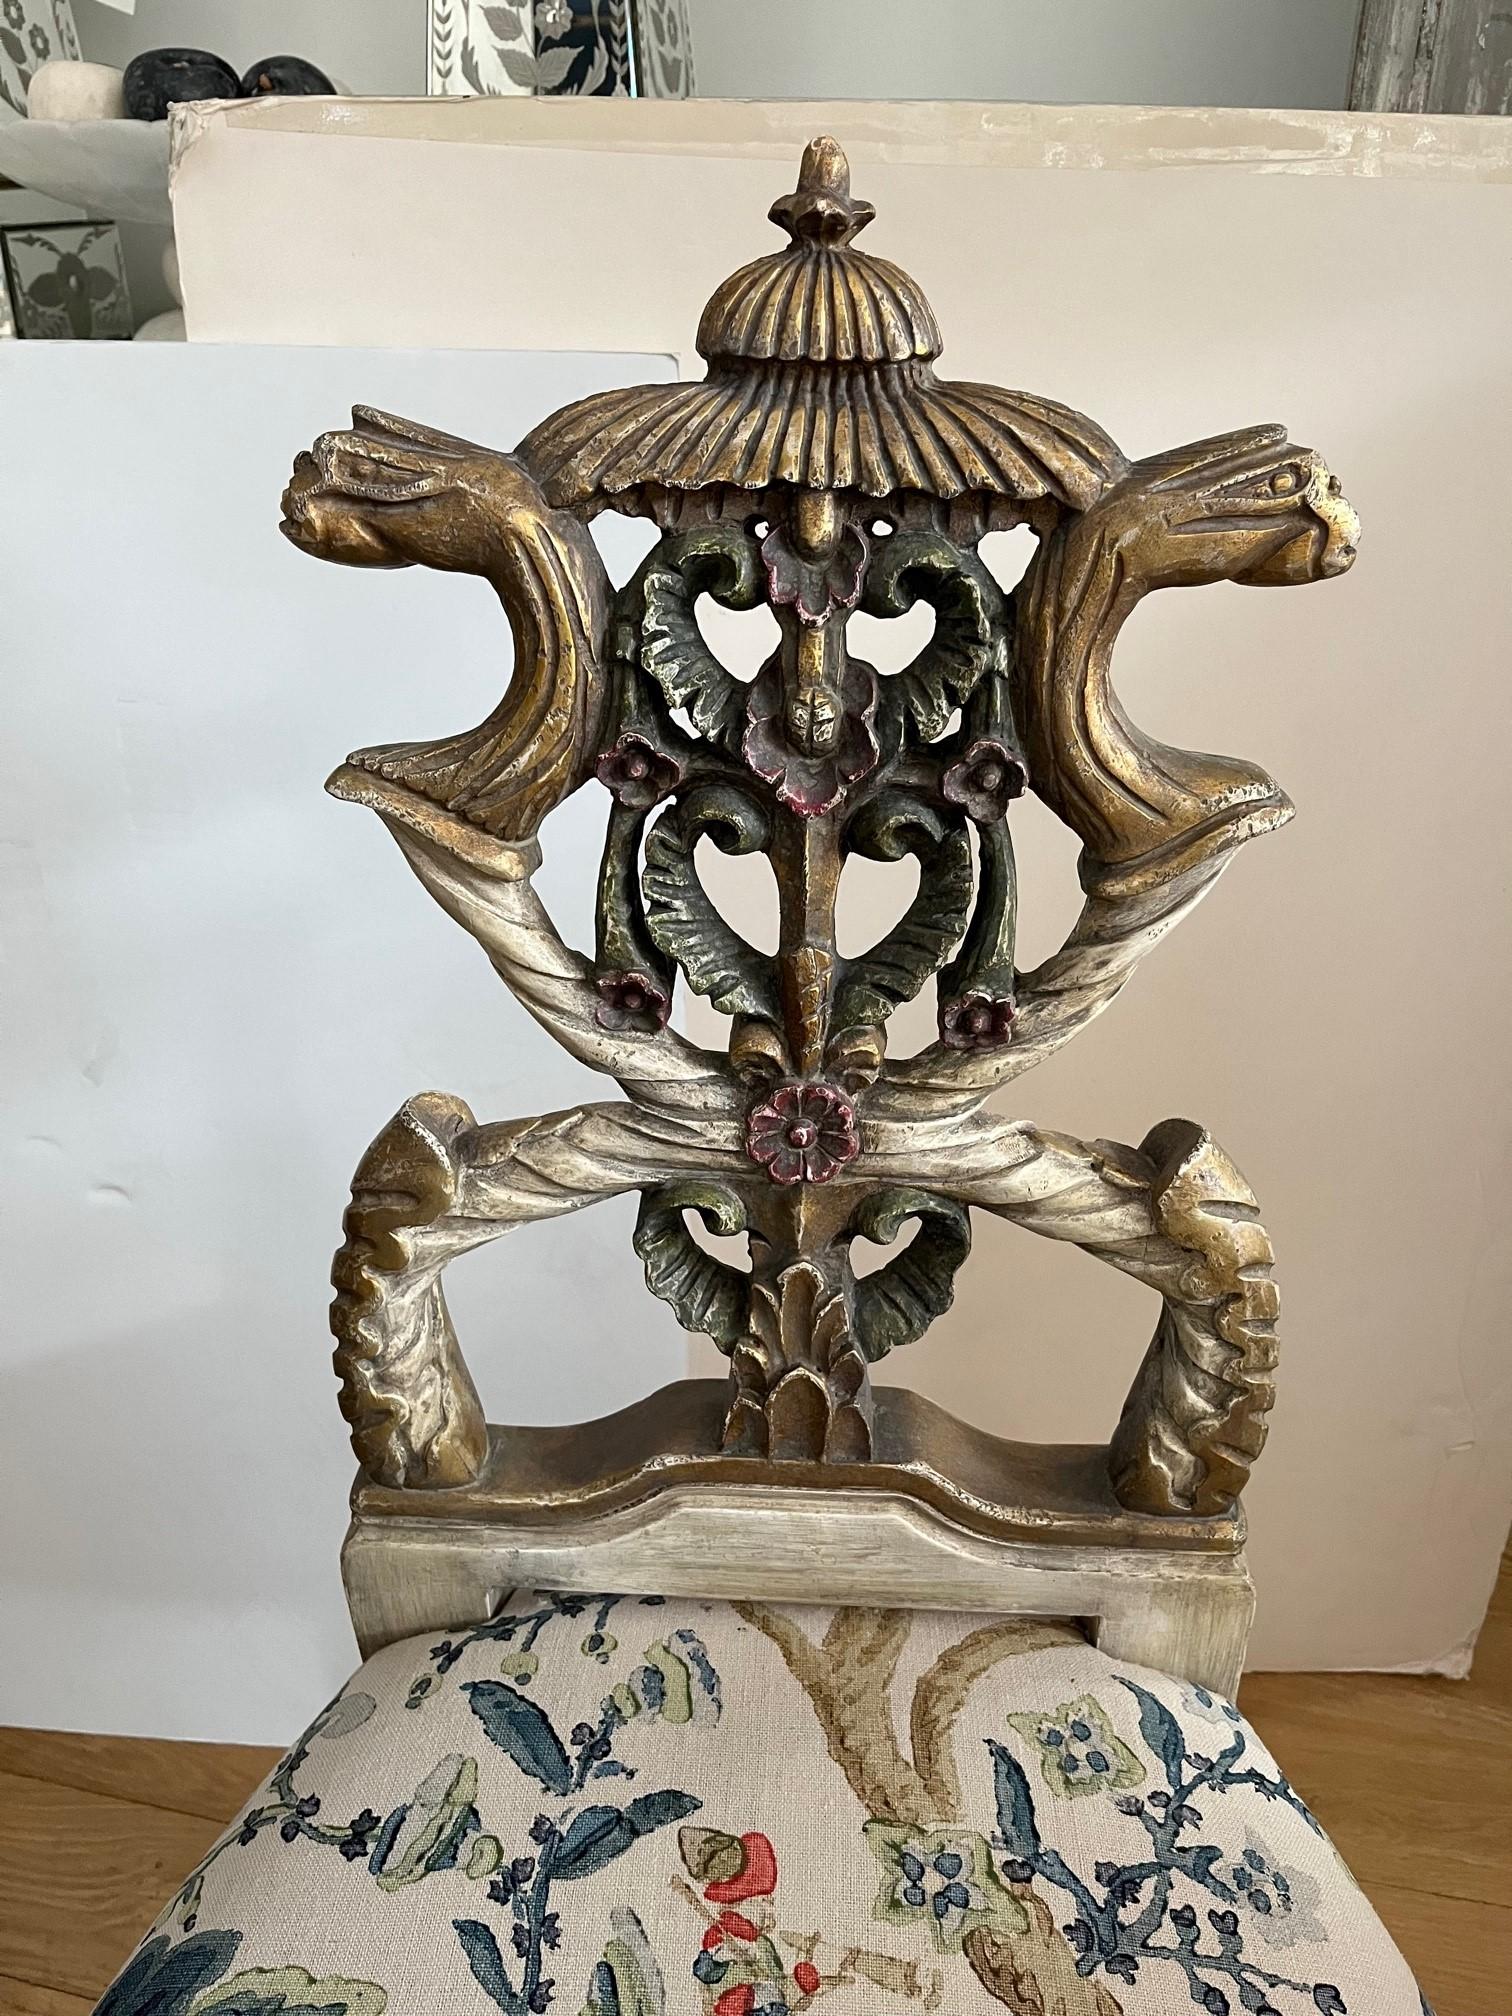 Hand Carved and Antique Hand Painted Finish with Gilded Detailing, Top of Chair foliated with Griffins Heads, Antiqued Brass Nail Head Trim Around the Seat. The Rounded Tapering Legs Curved Inwards in the Middle but splay out Towards the feet, above